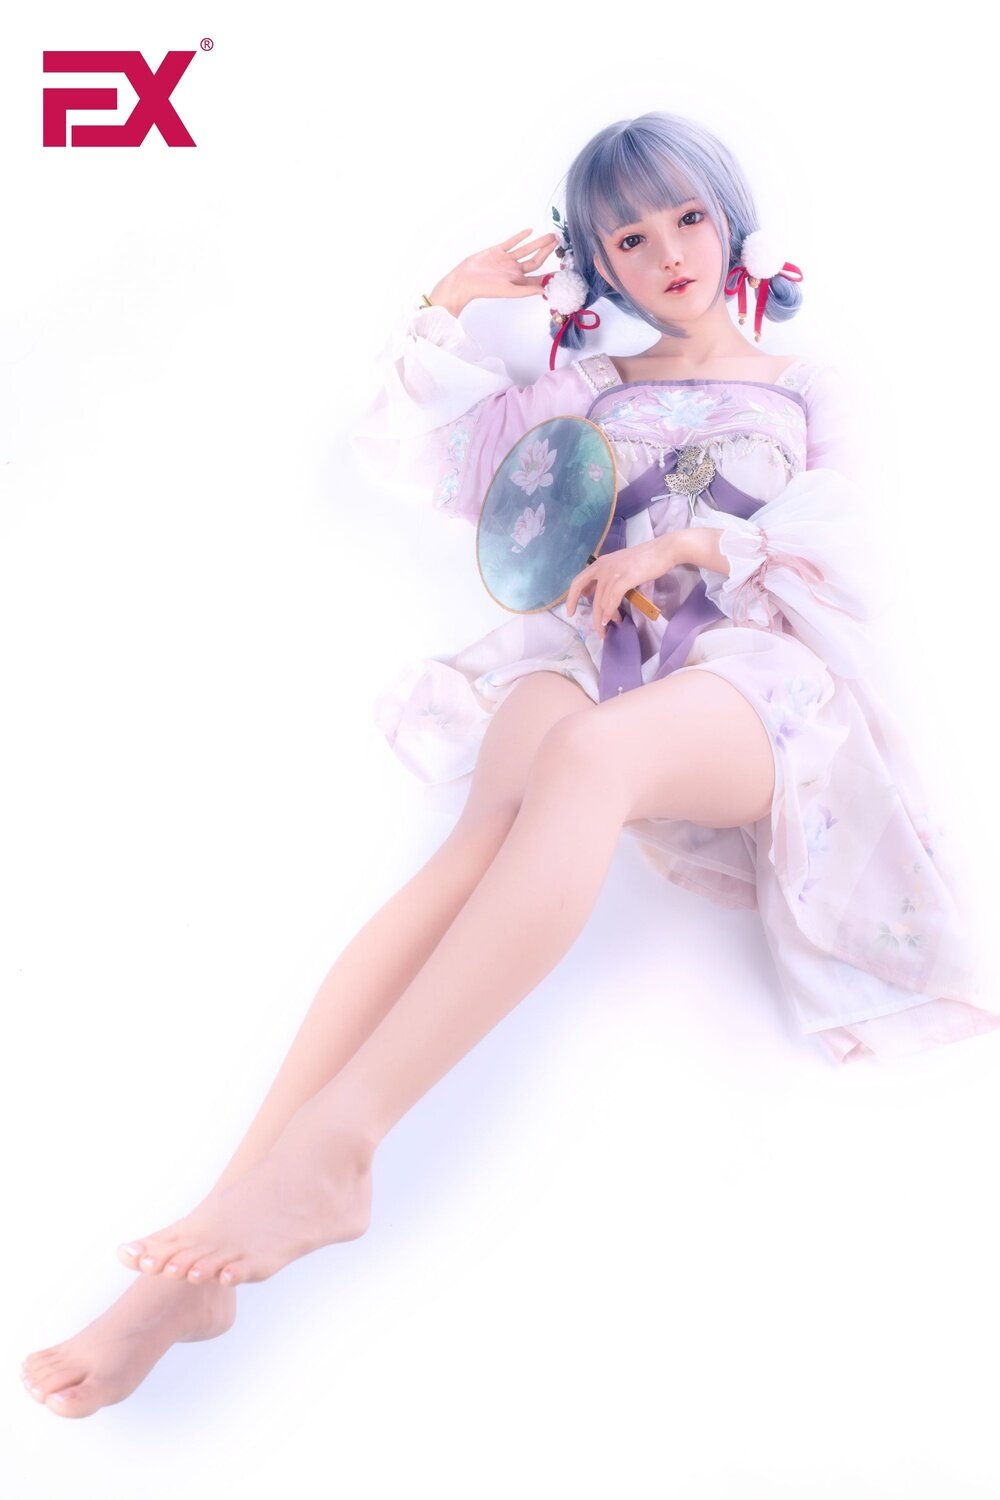 Elanor - 149cm(4ft11) C-Cup DS / EX 149cm(4ft11) Real Dolls Come Sex Doll image9